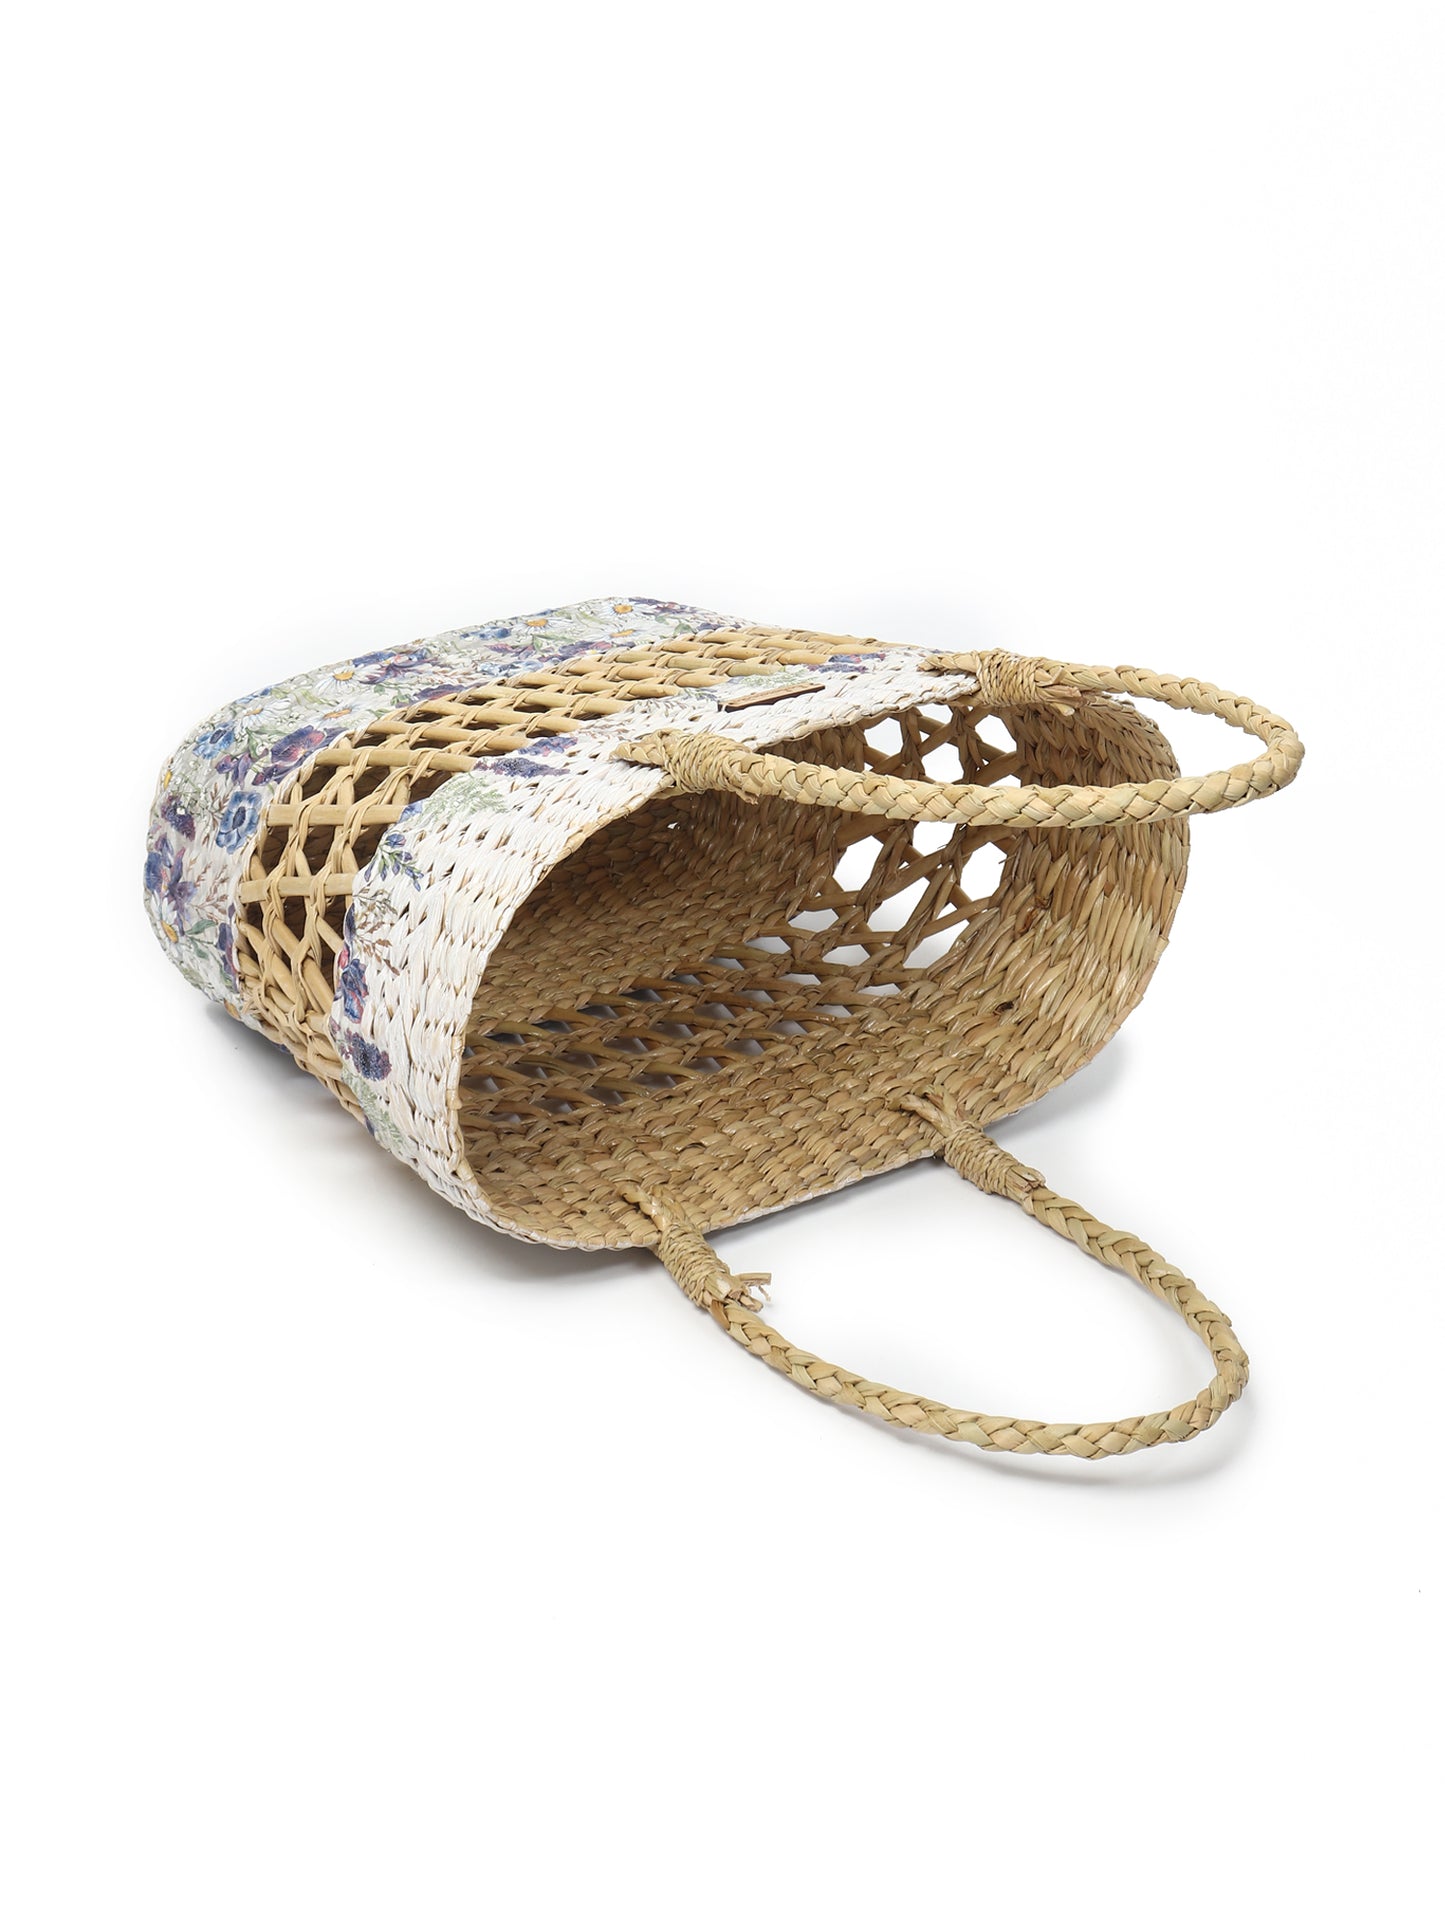 Buy Seagrass Basket 